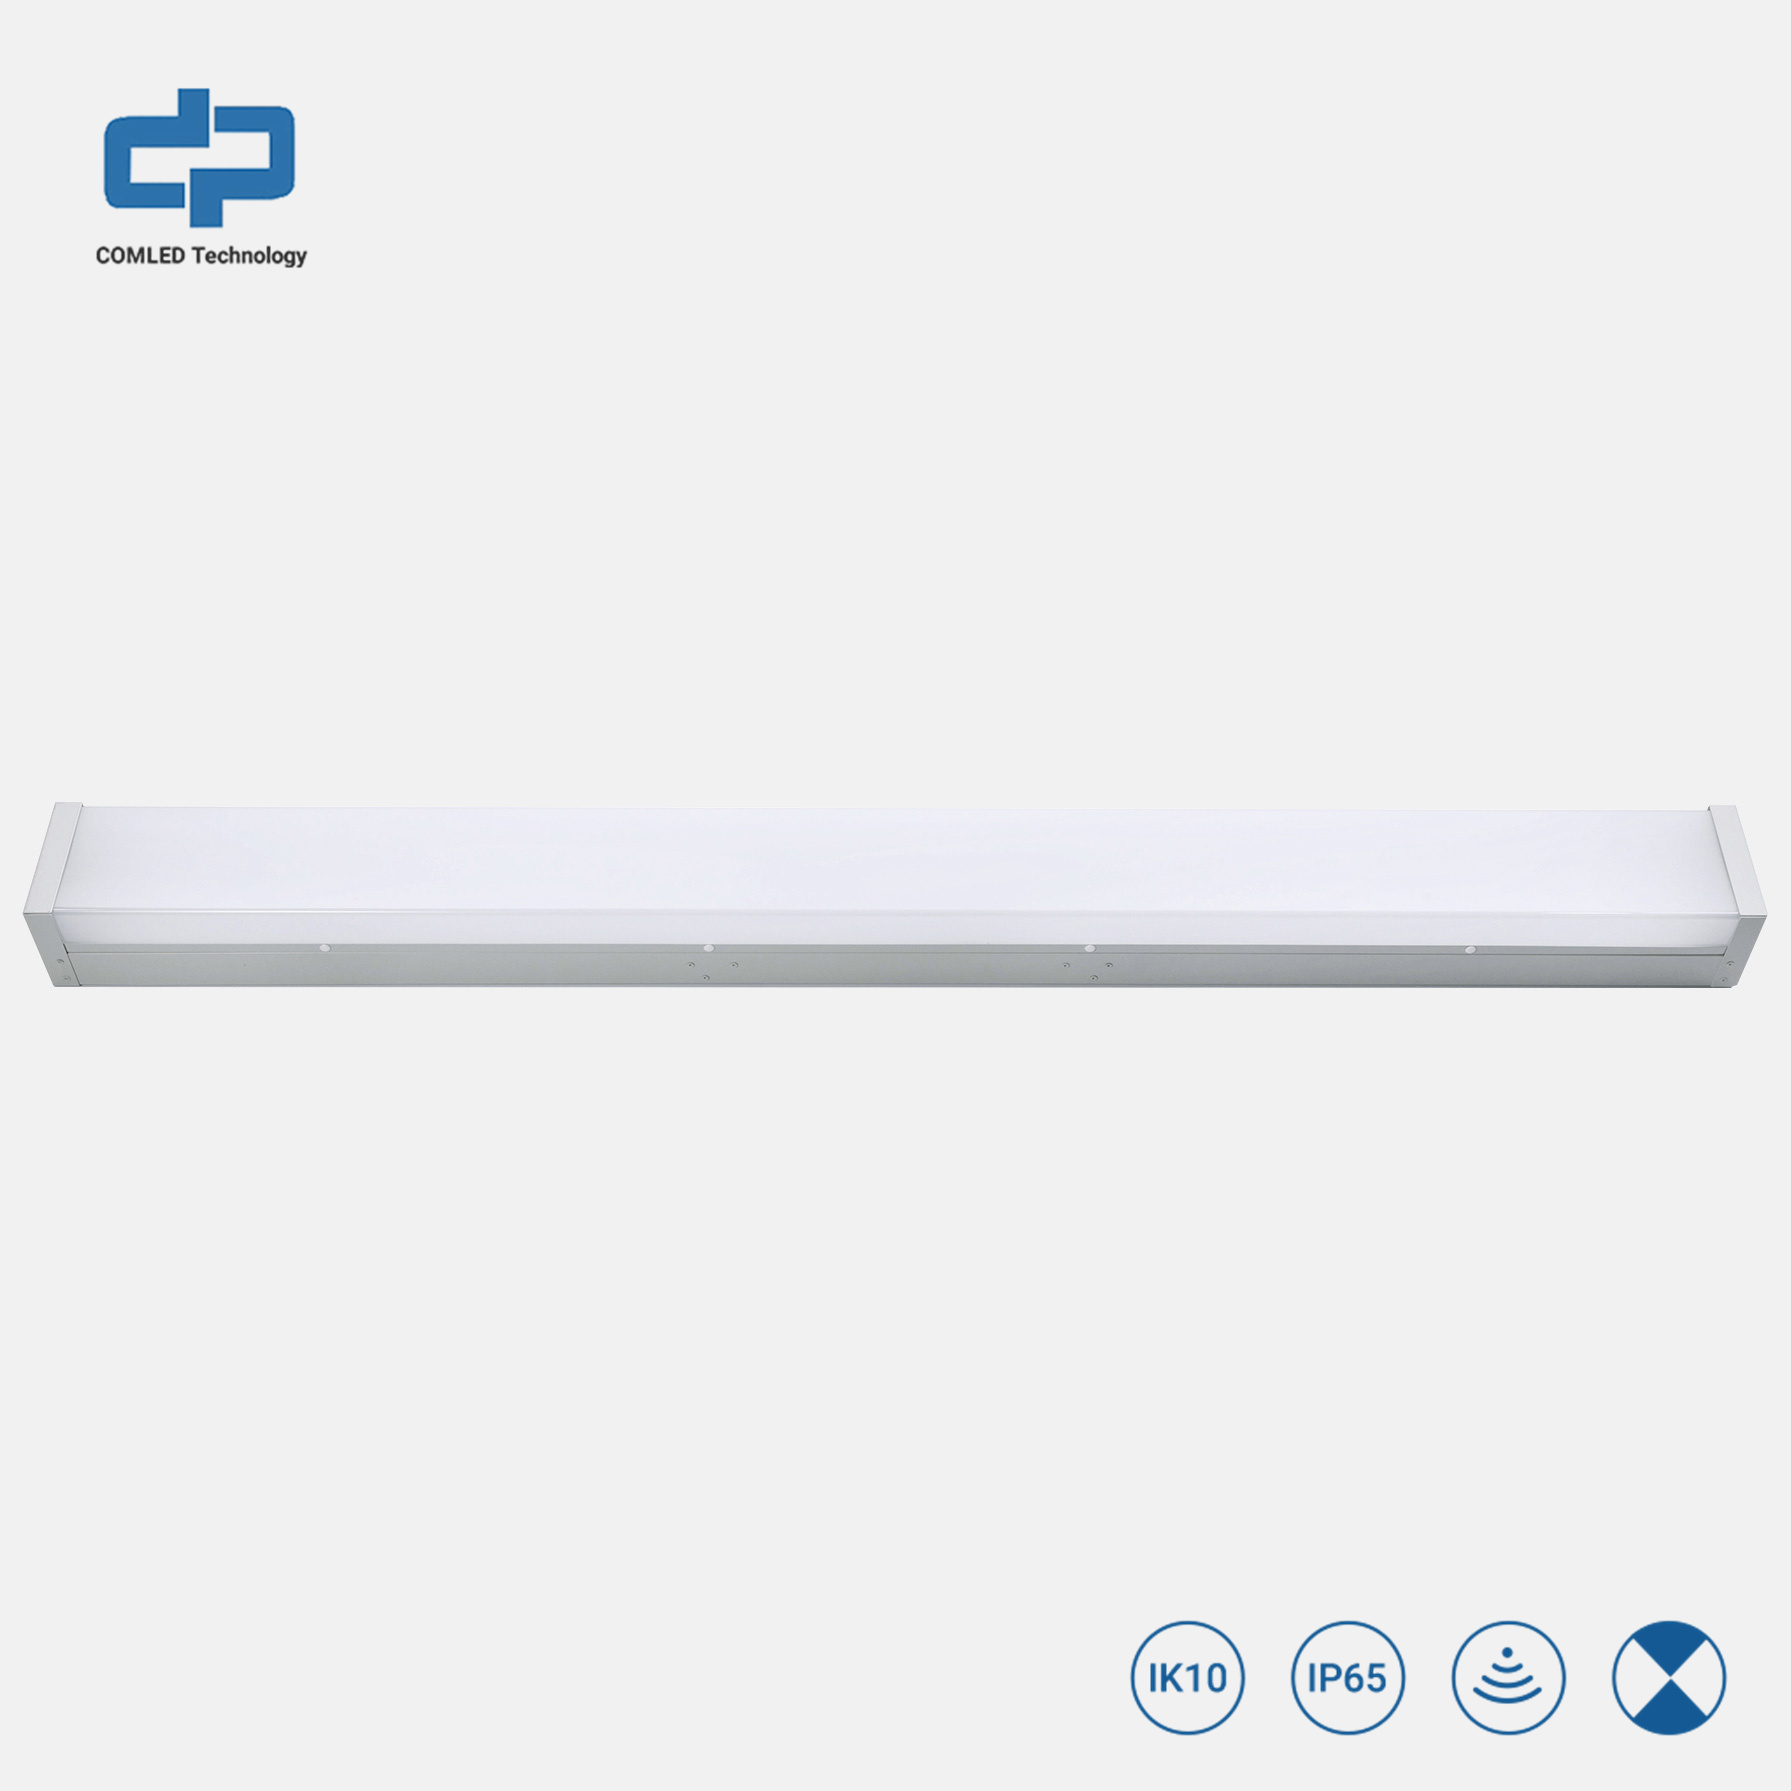 IP20 led strip linear surface fixture Featured Image